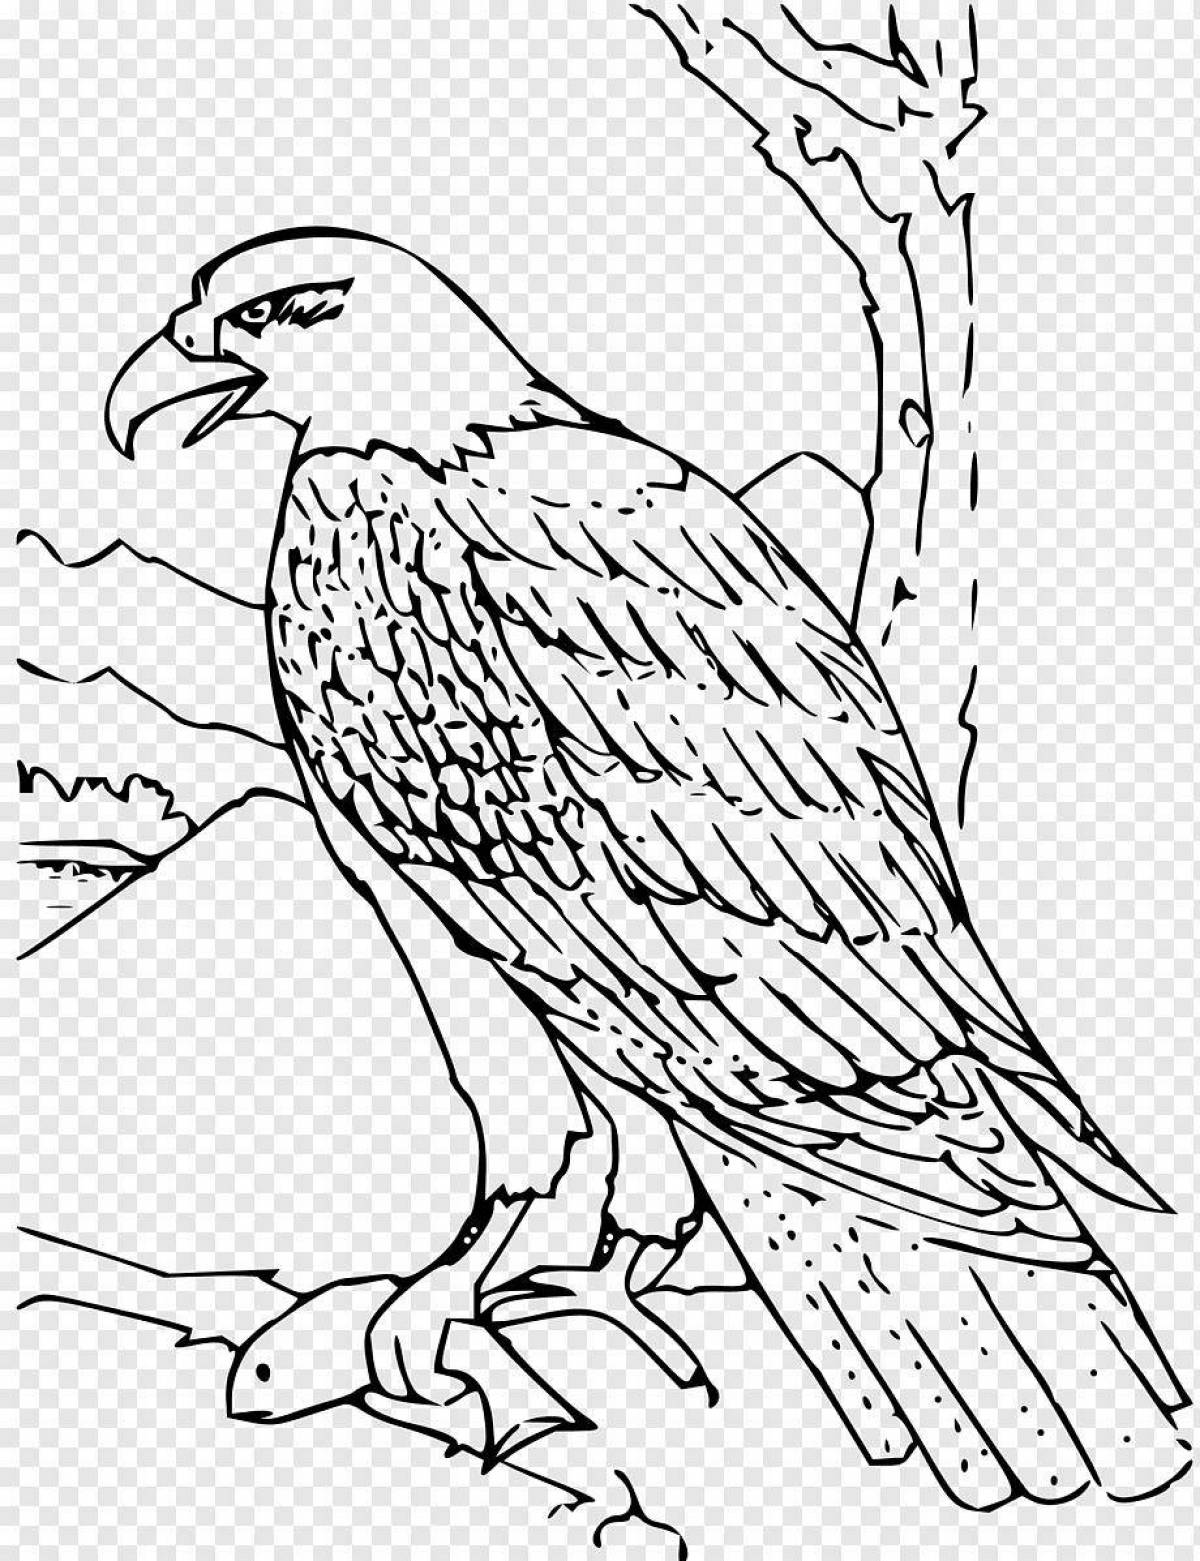 Cute kite coloring page